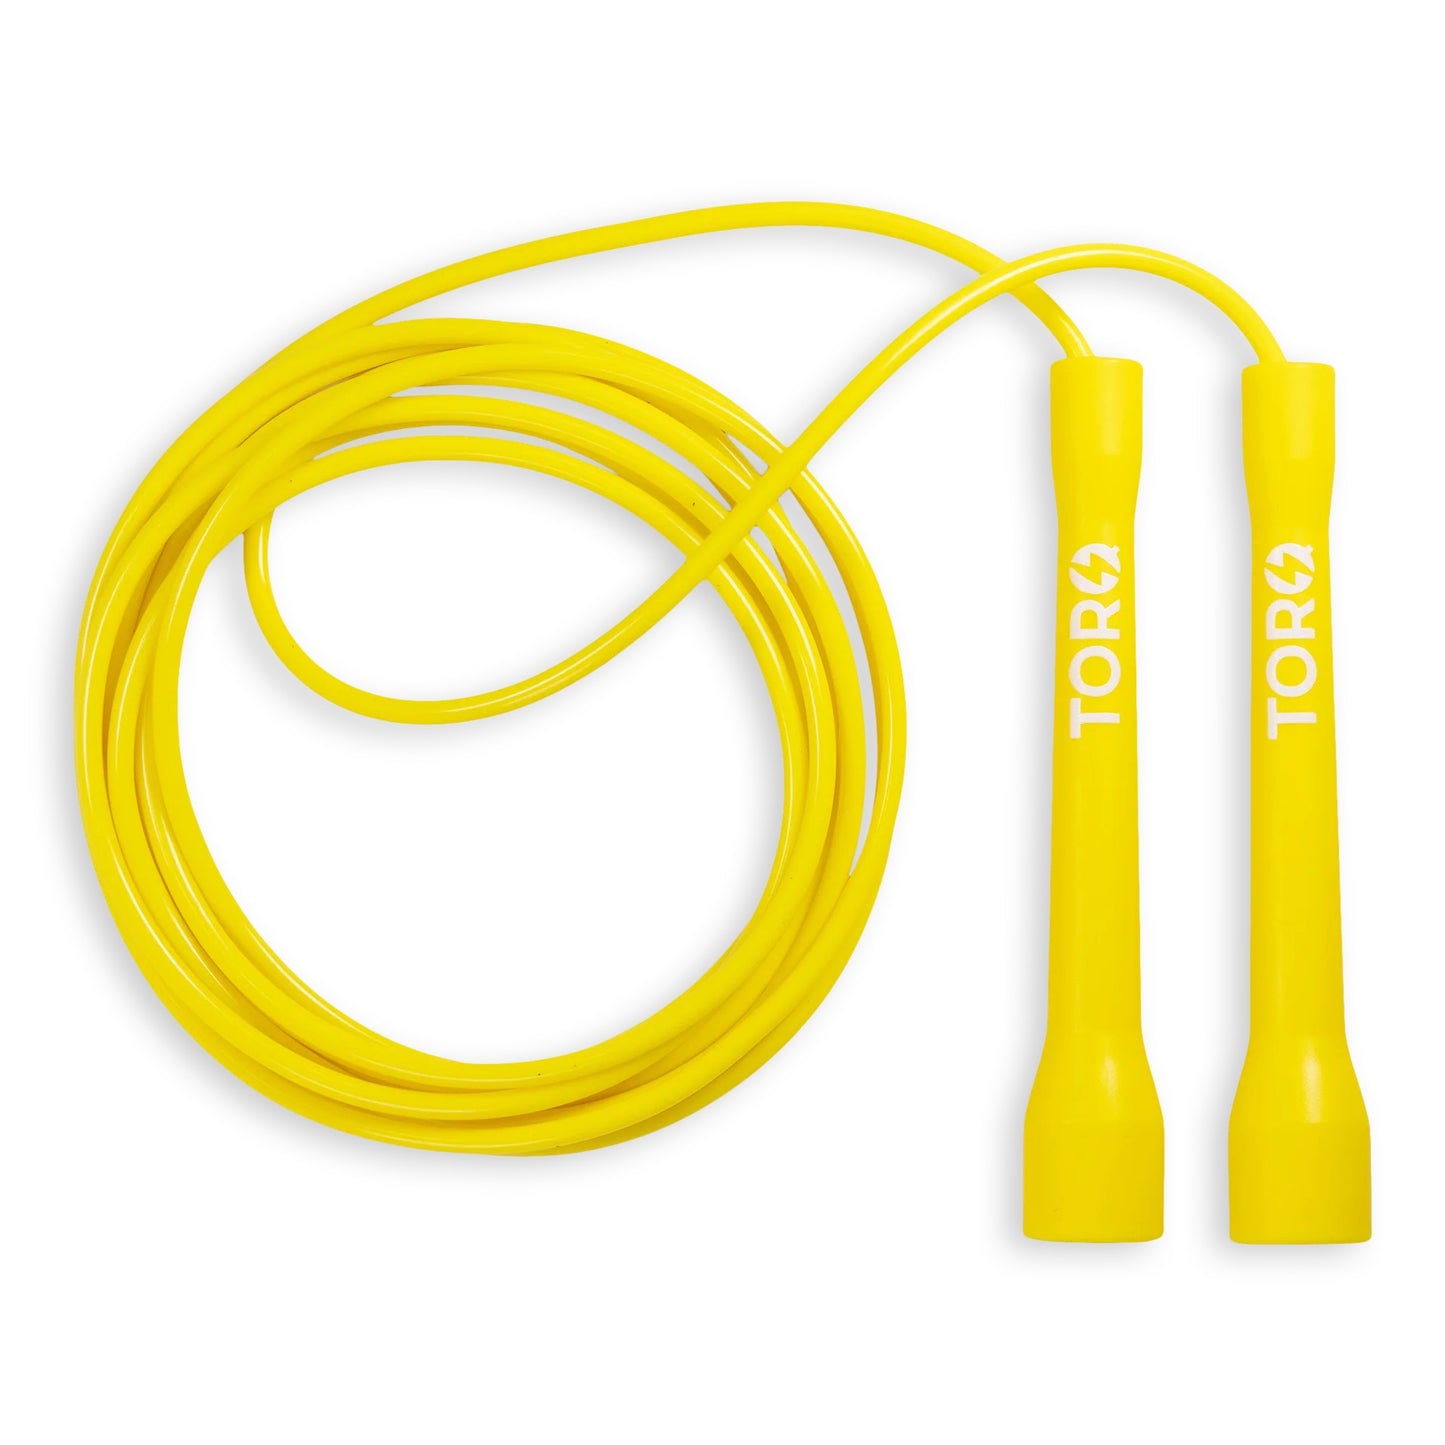 Jump rope Current